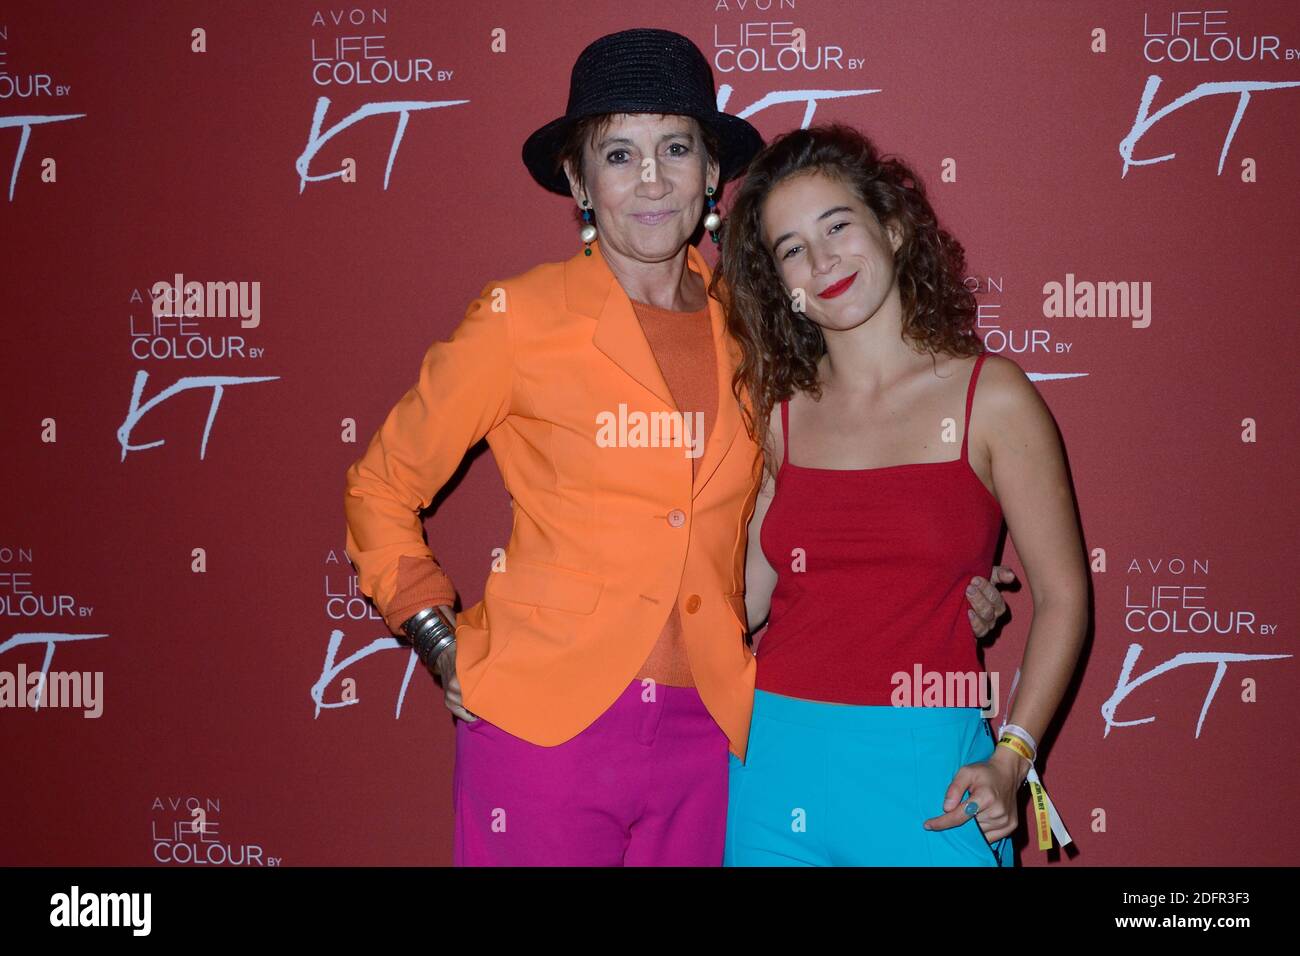 Caroline Loeb and her daughter Louise attending the Avon Life Colour Party  By Kenzo Takada as part of Paris Fashion Week Womenswear Spring - summer  2019 held in Paris, France on october